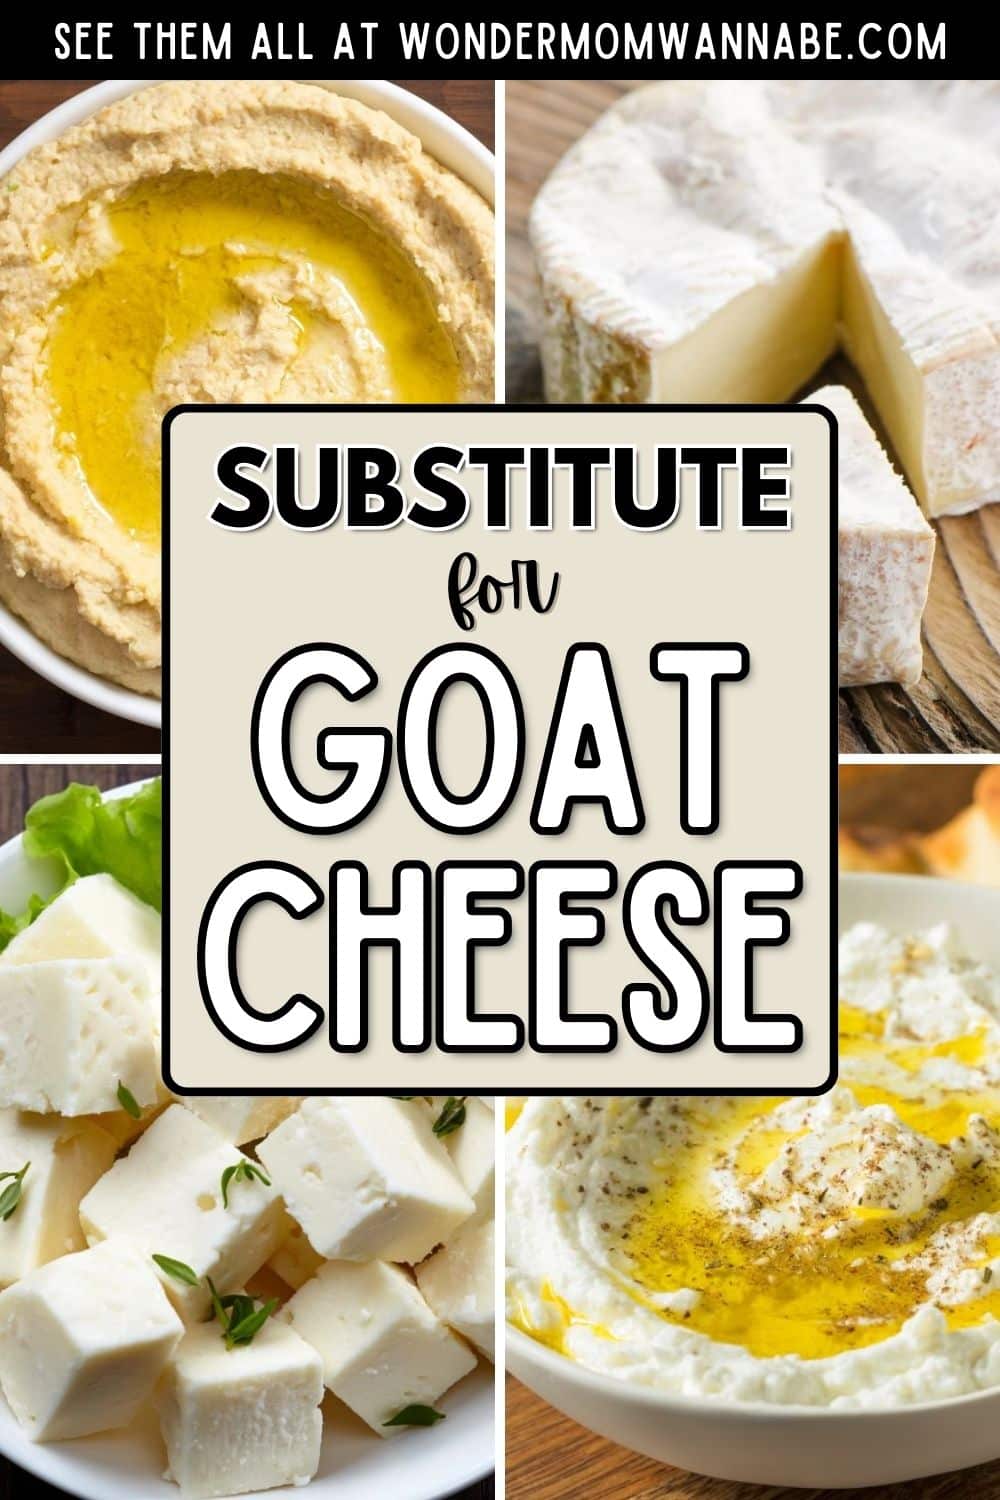 A collage featuring various alternatives that can be used as a substitute for goat cheese.